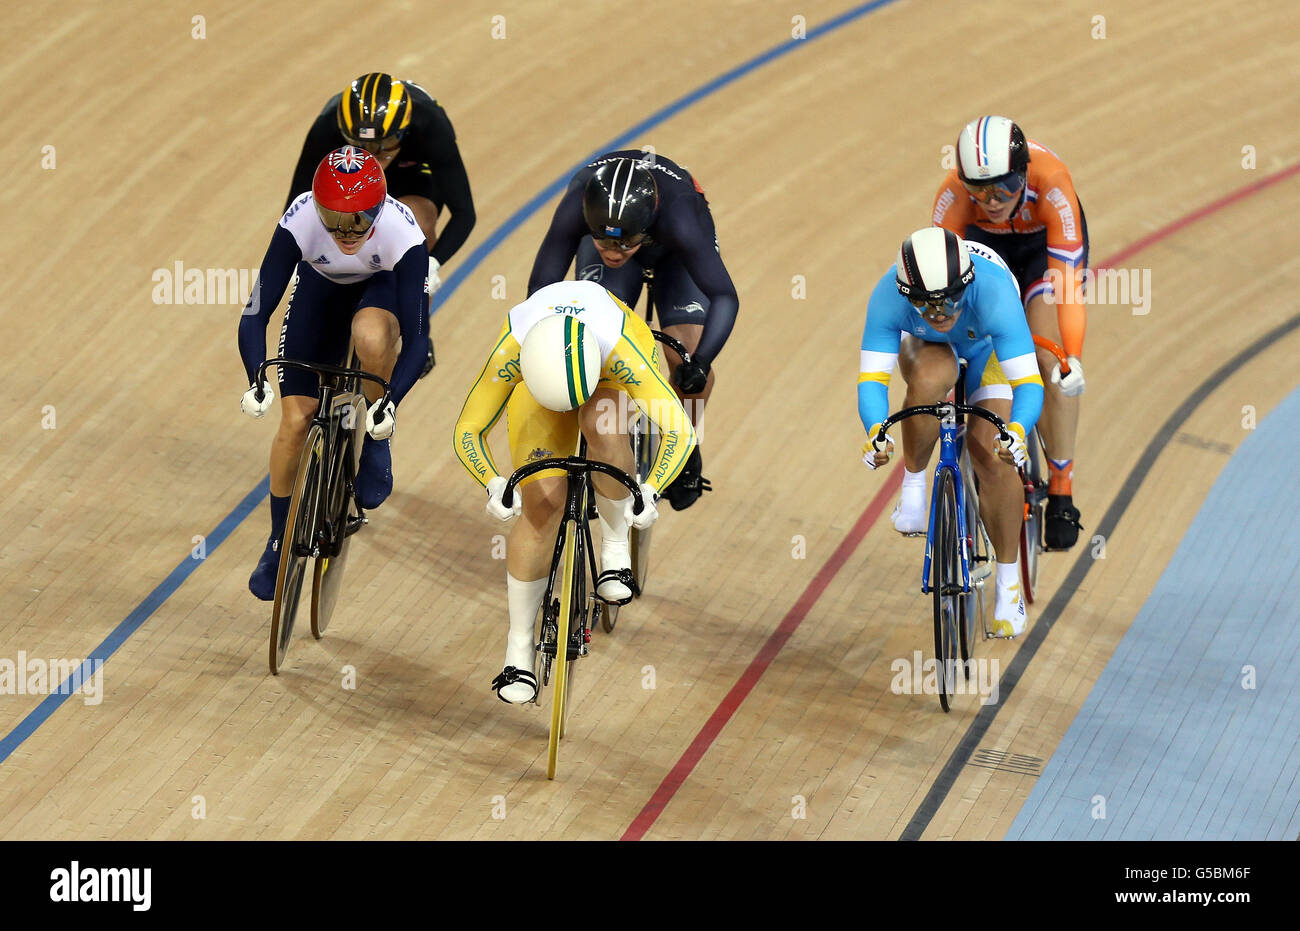 Australia's Anna Mears (yellow) leads Great Britain's Victoria Pendleton (left) in the first round of the Women's Keirin at the Velodrome in the Olympic Park, during day seven of the London 2012 Olympics. Stock Photo